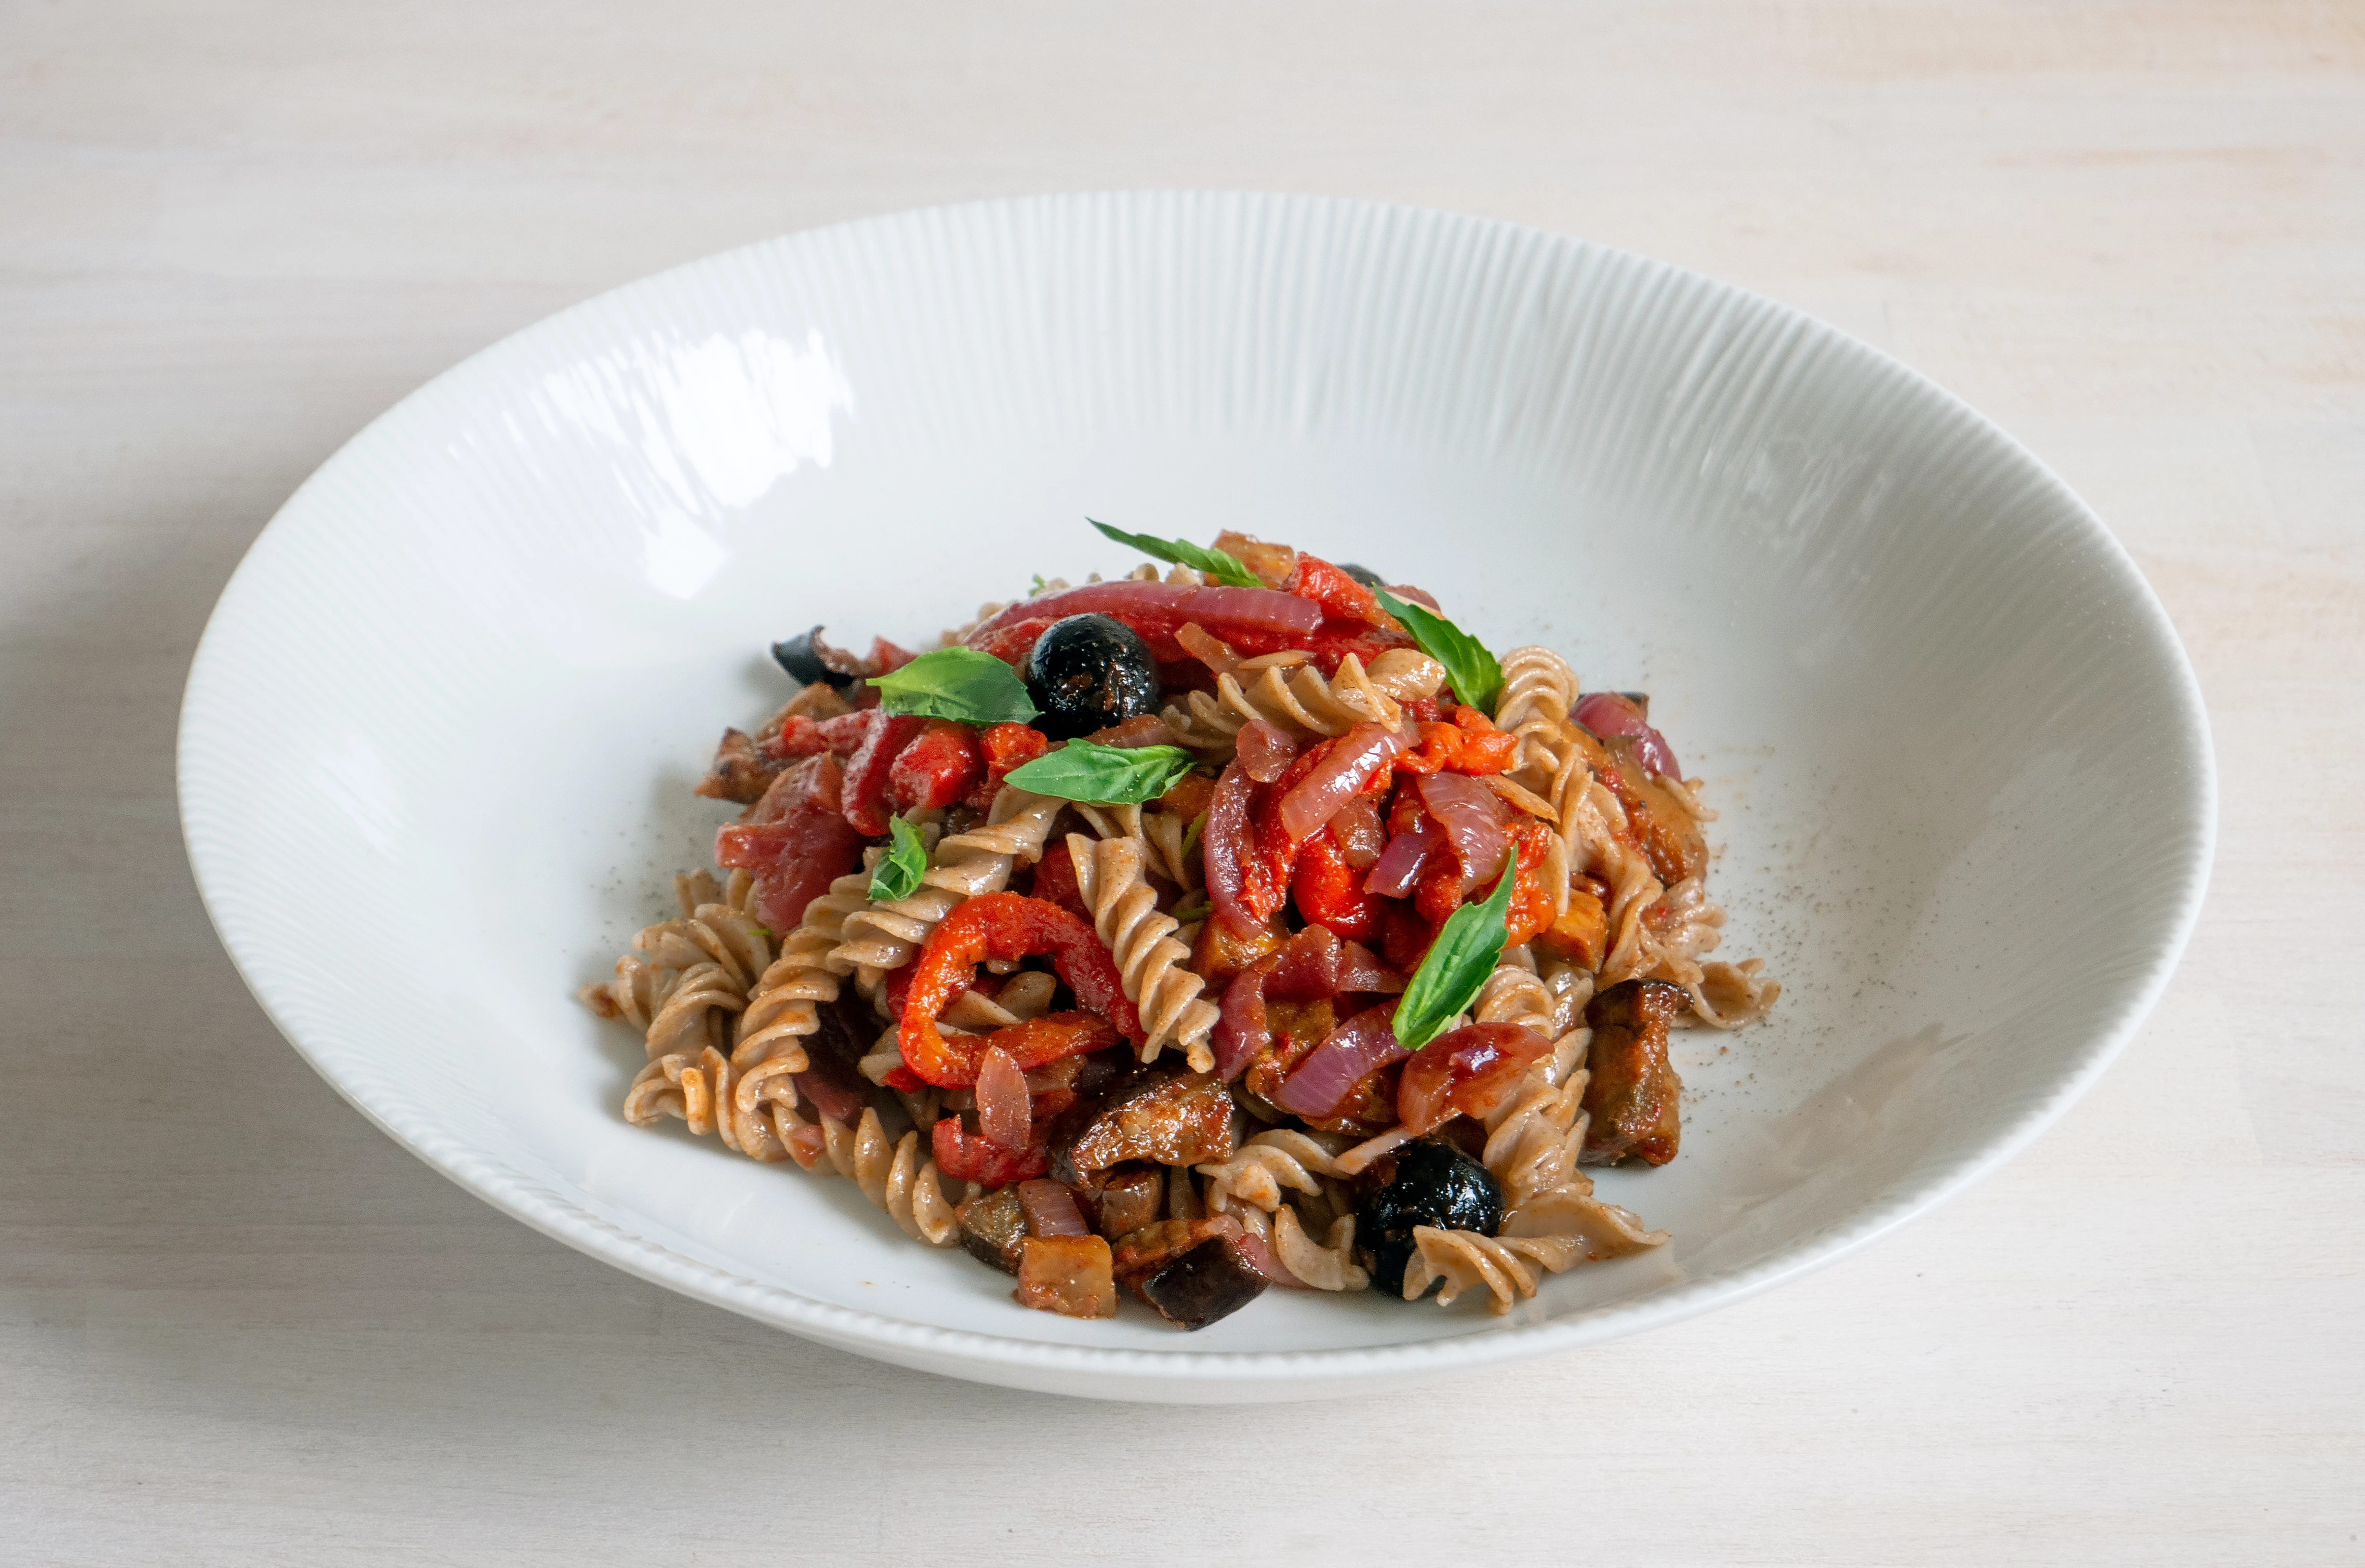 Recipe: Pasta with peppers, olives and spiced aubergine